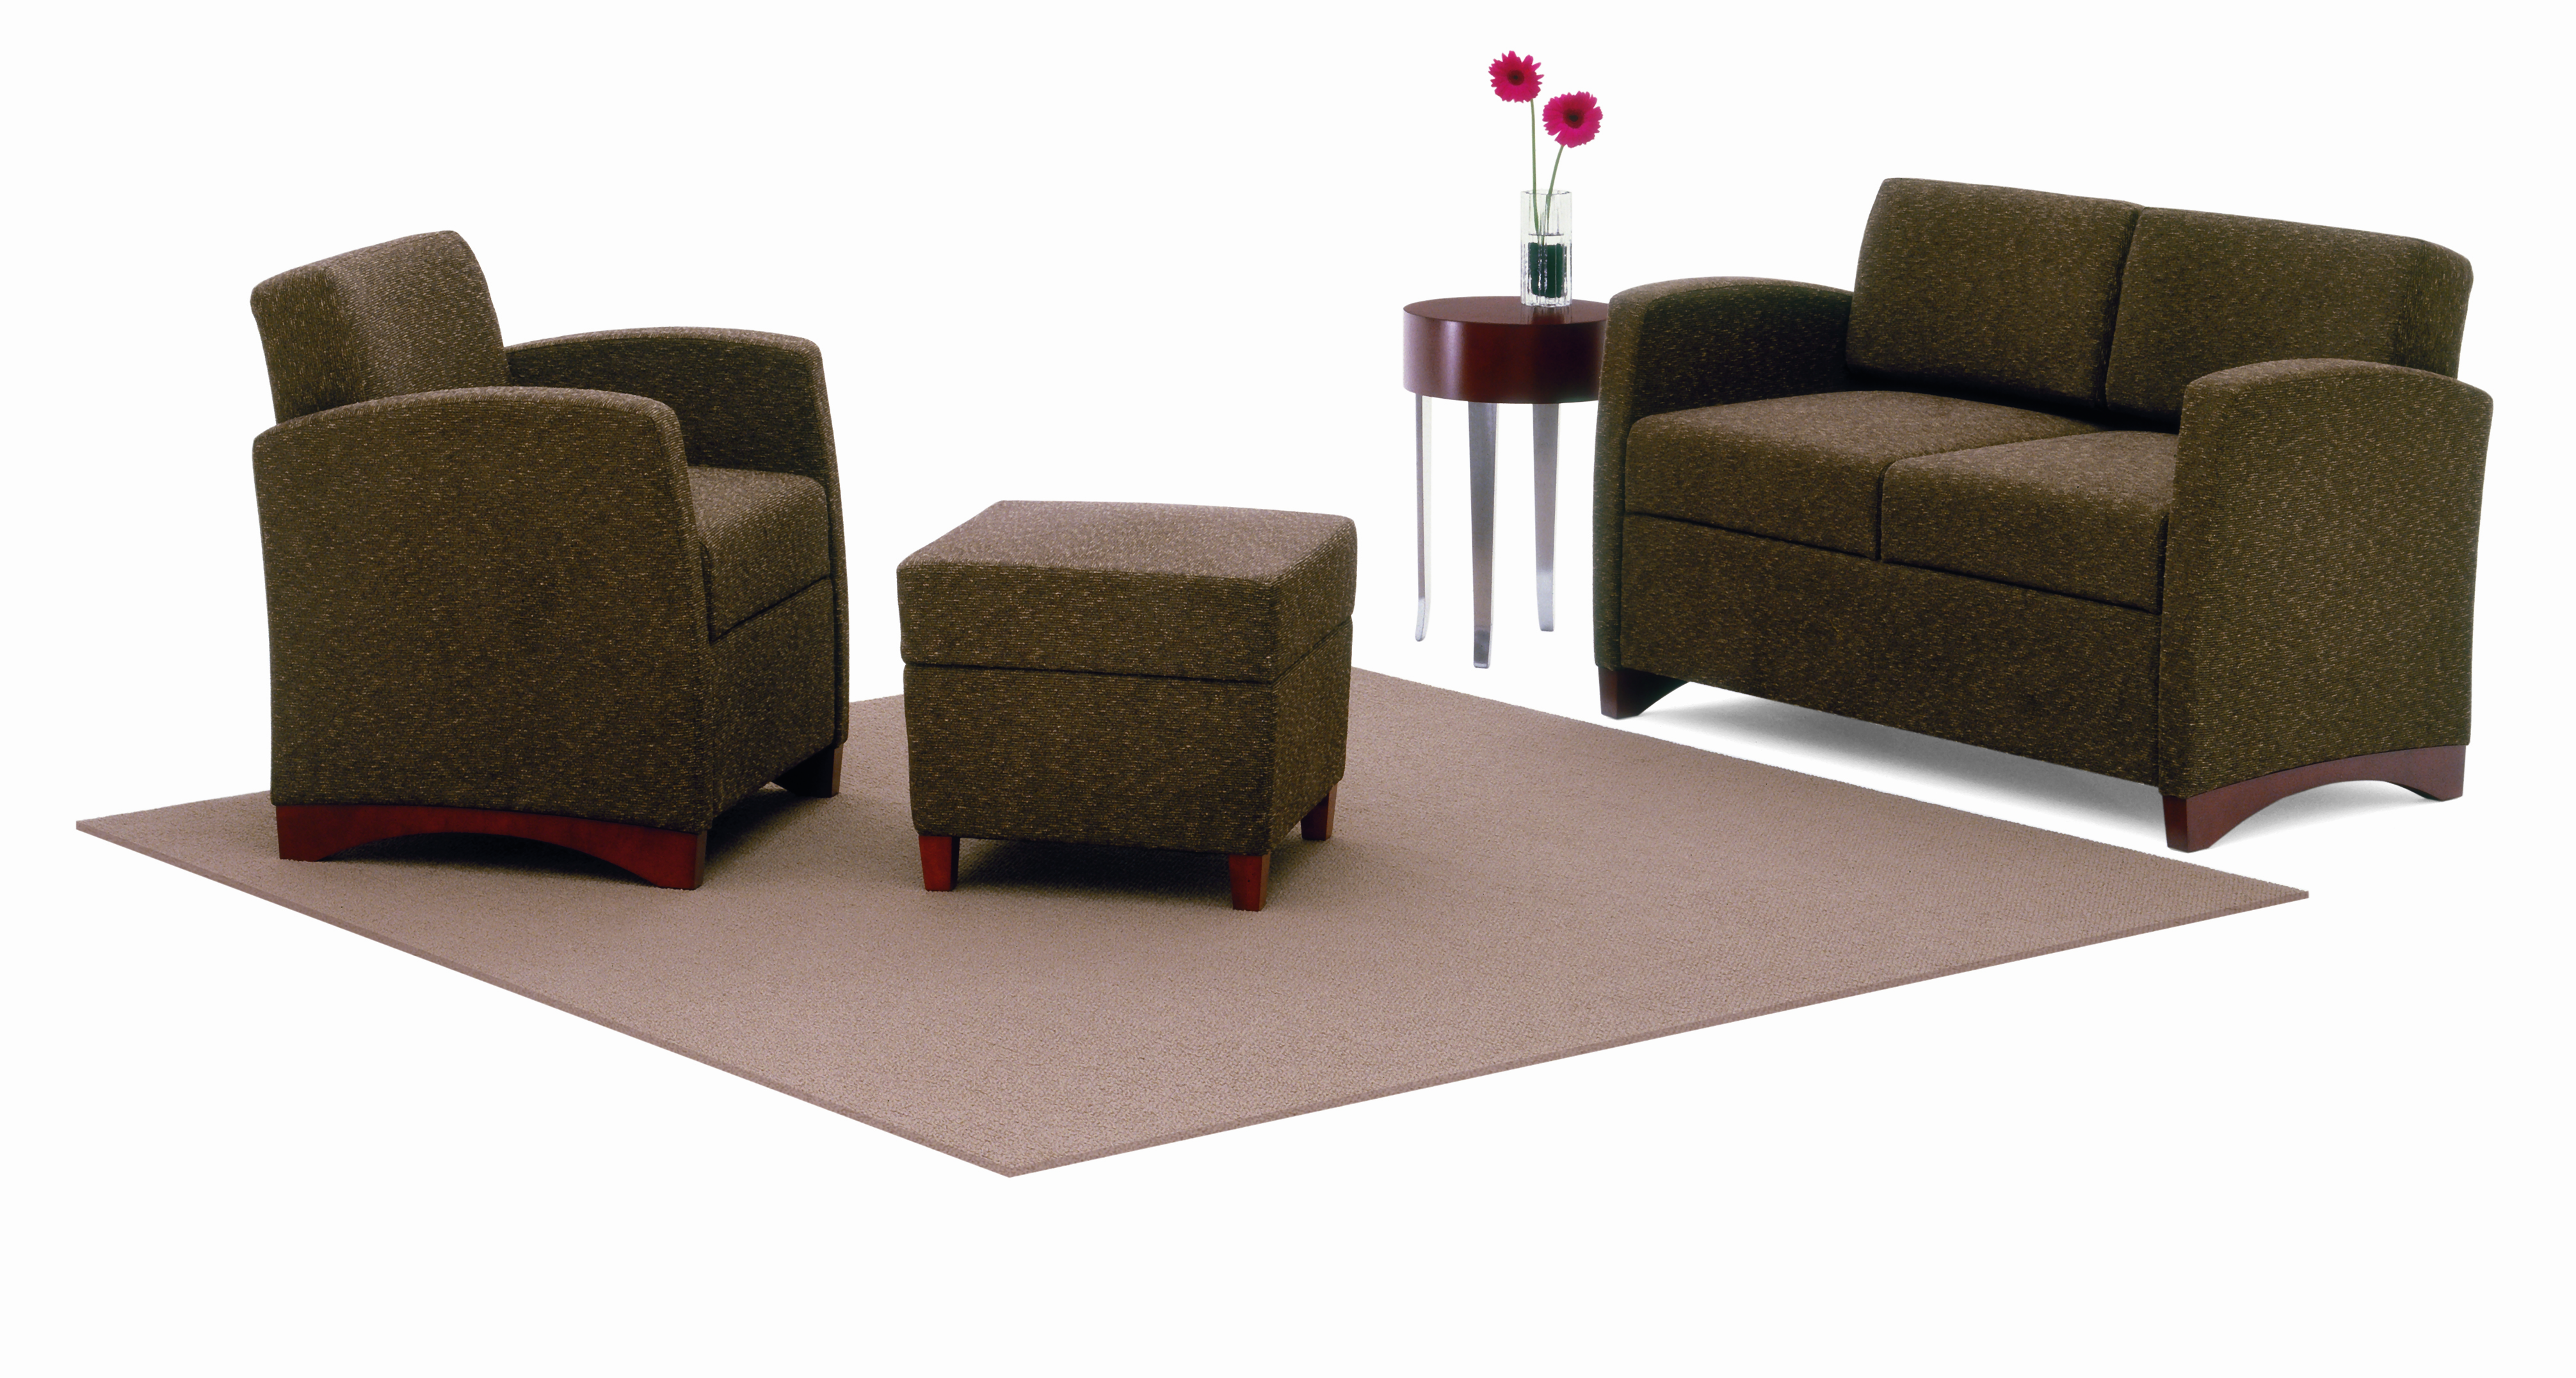 Tria Upholstered Arm Group with Ottoman and Tria Table